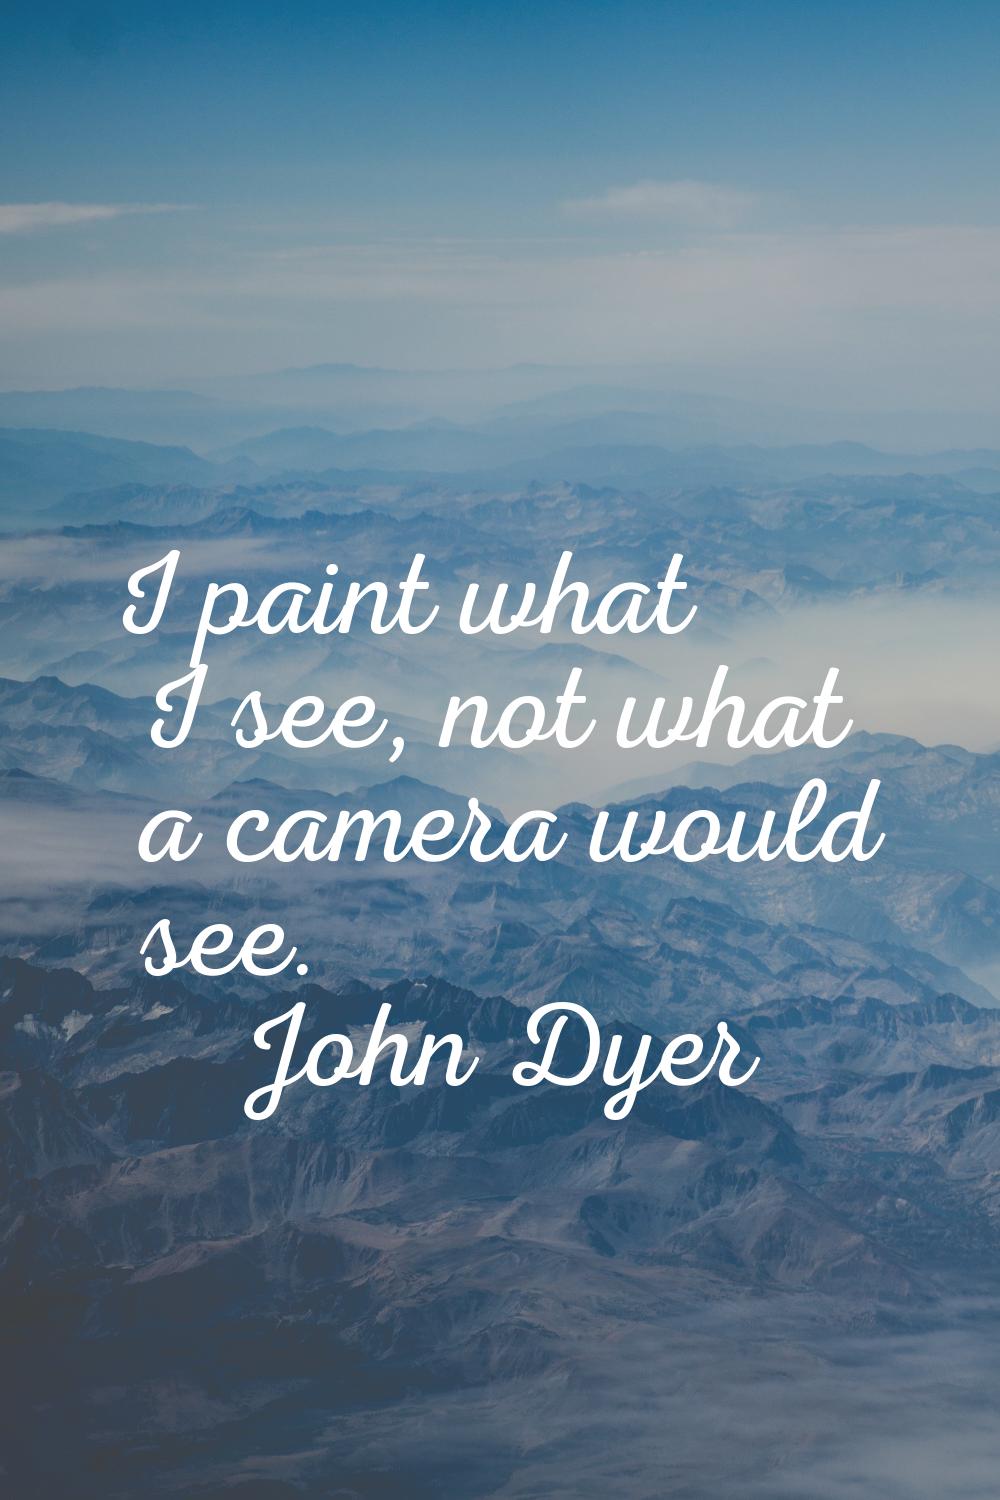 I paint what I see, not what a camera would see.